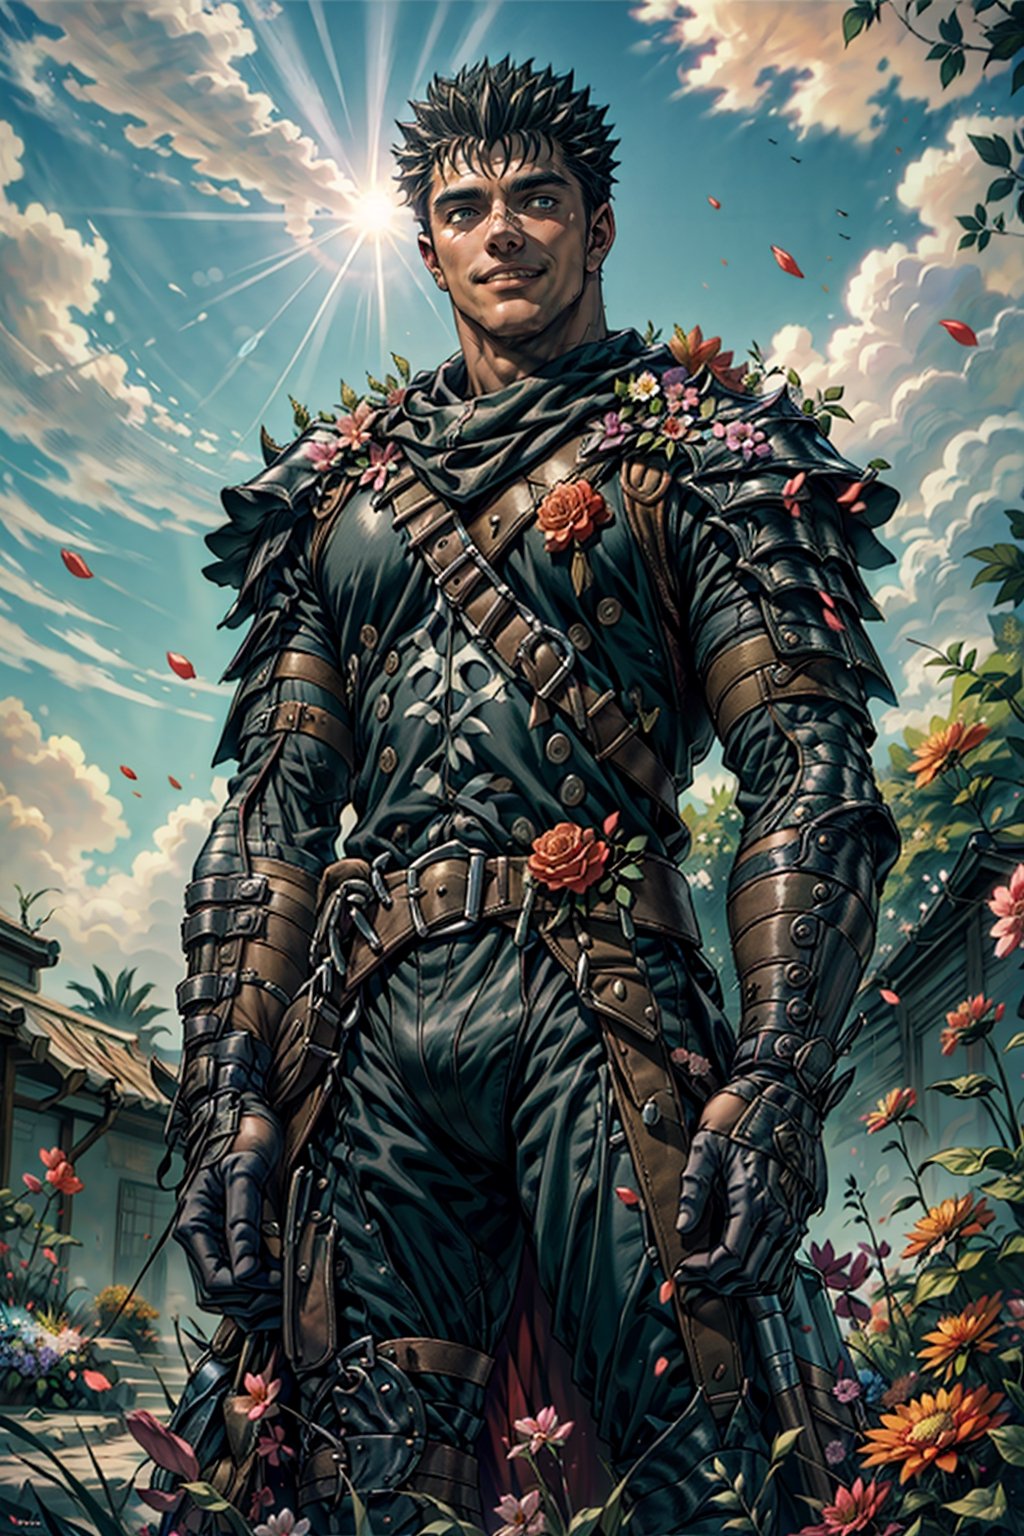 (4k), (masterpiece), (best quality),(extremely intricate), (realistic), (sharp focus), (cinematic lighting), (extremely detailed),

A mature man who looks like "Guts" from Berserk wearing an armor, standing in a garden of flowers. His hair is adorned with flowers. He has a happy expression and is smiling at the viewer. The sun is shining brightly behind him, casting a golden glow over the scene.

,flower4rmor, flower bodysuit,Flower